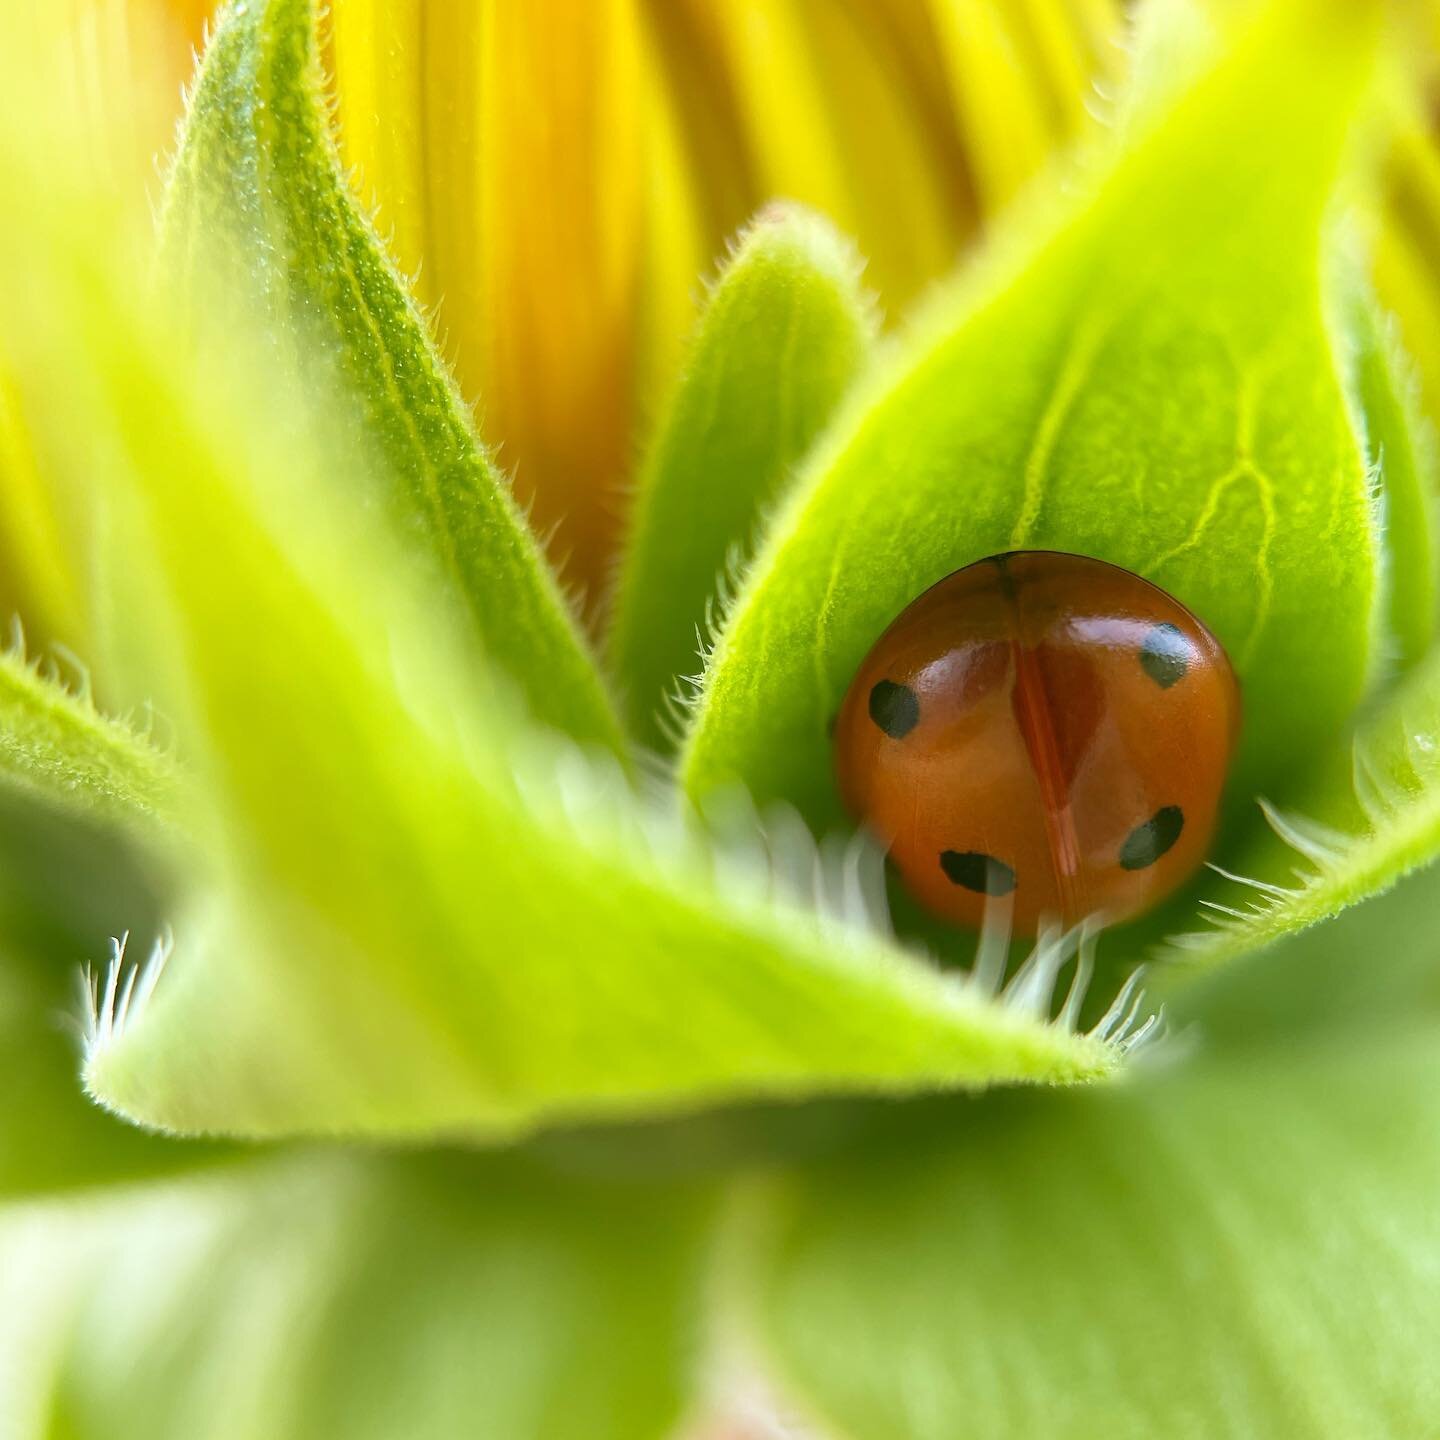 Found ladybug nestled in a sunflower taking a snooze. 🐞